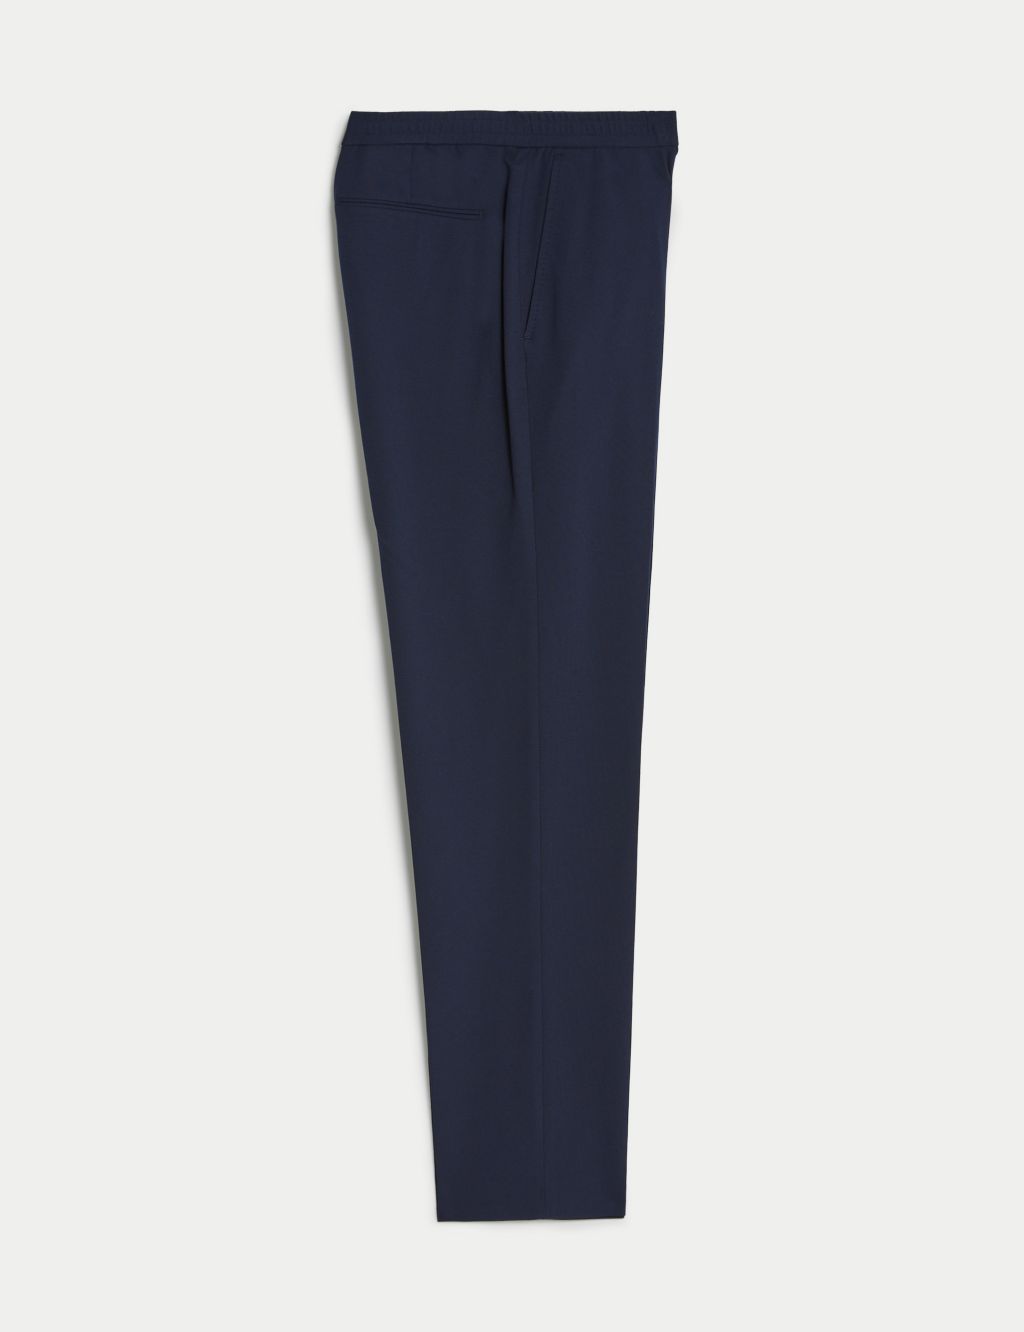 Jersey Flat Front Stretch Trousers image 2